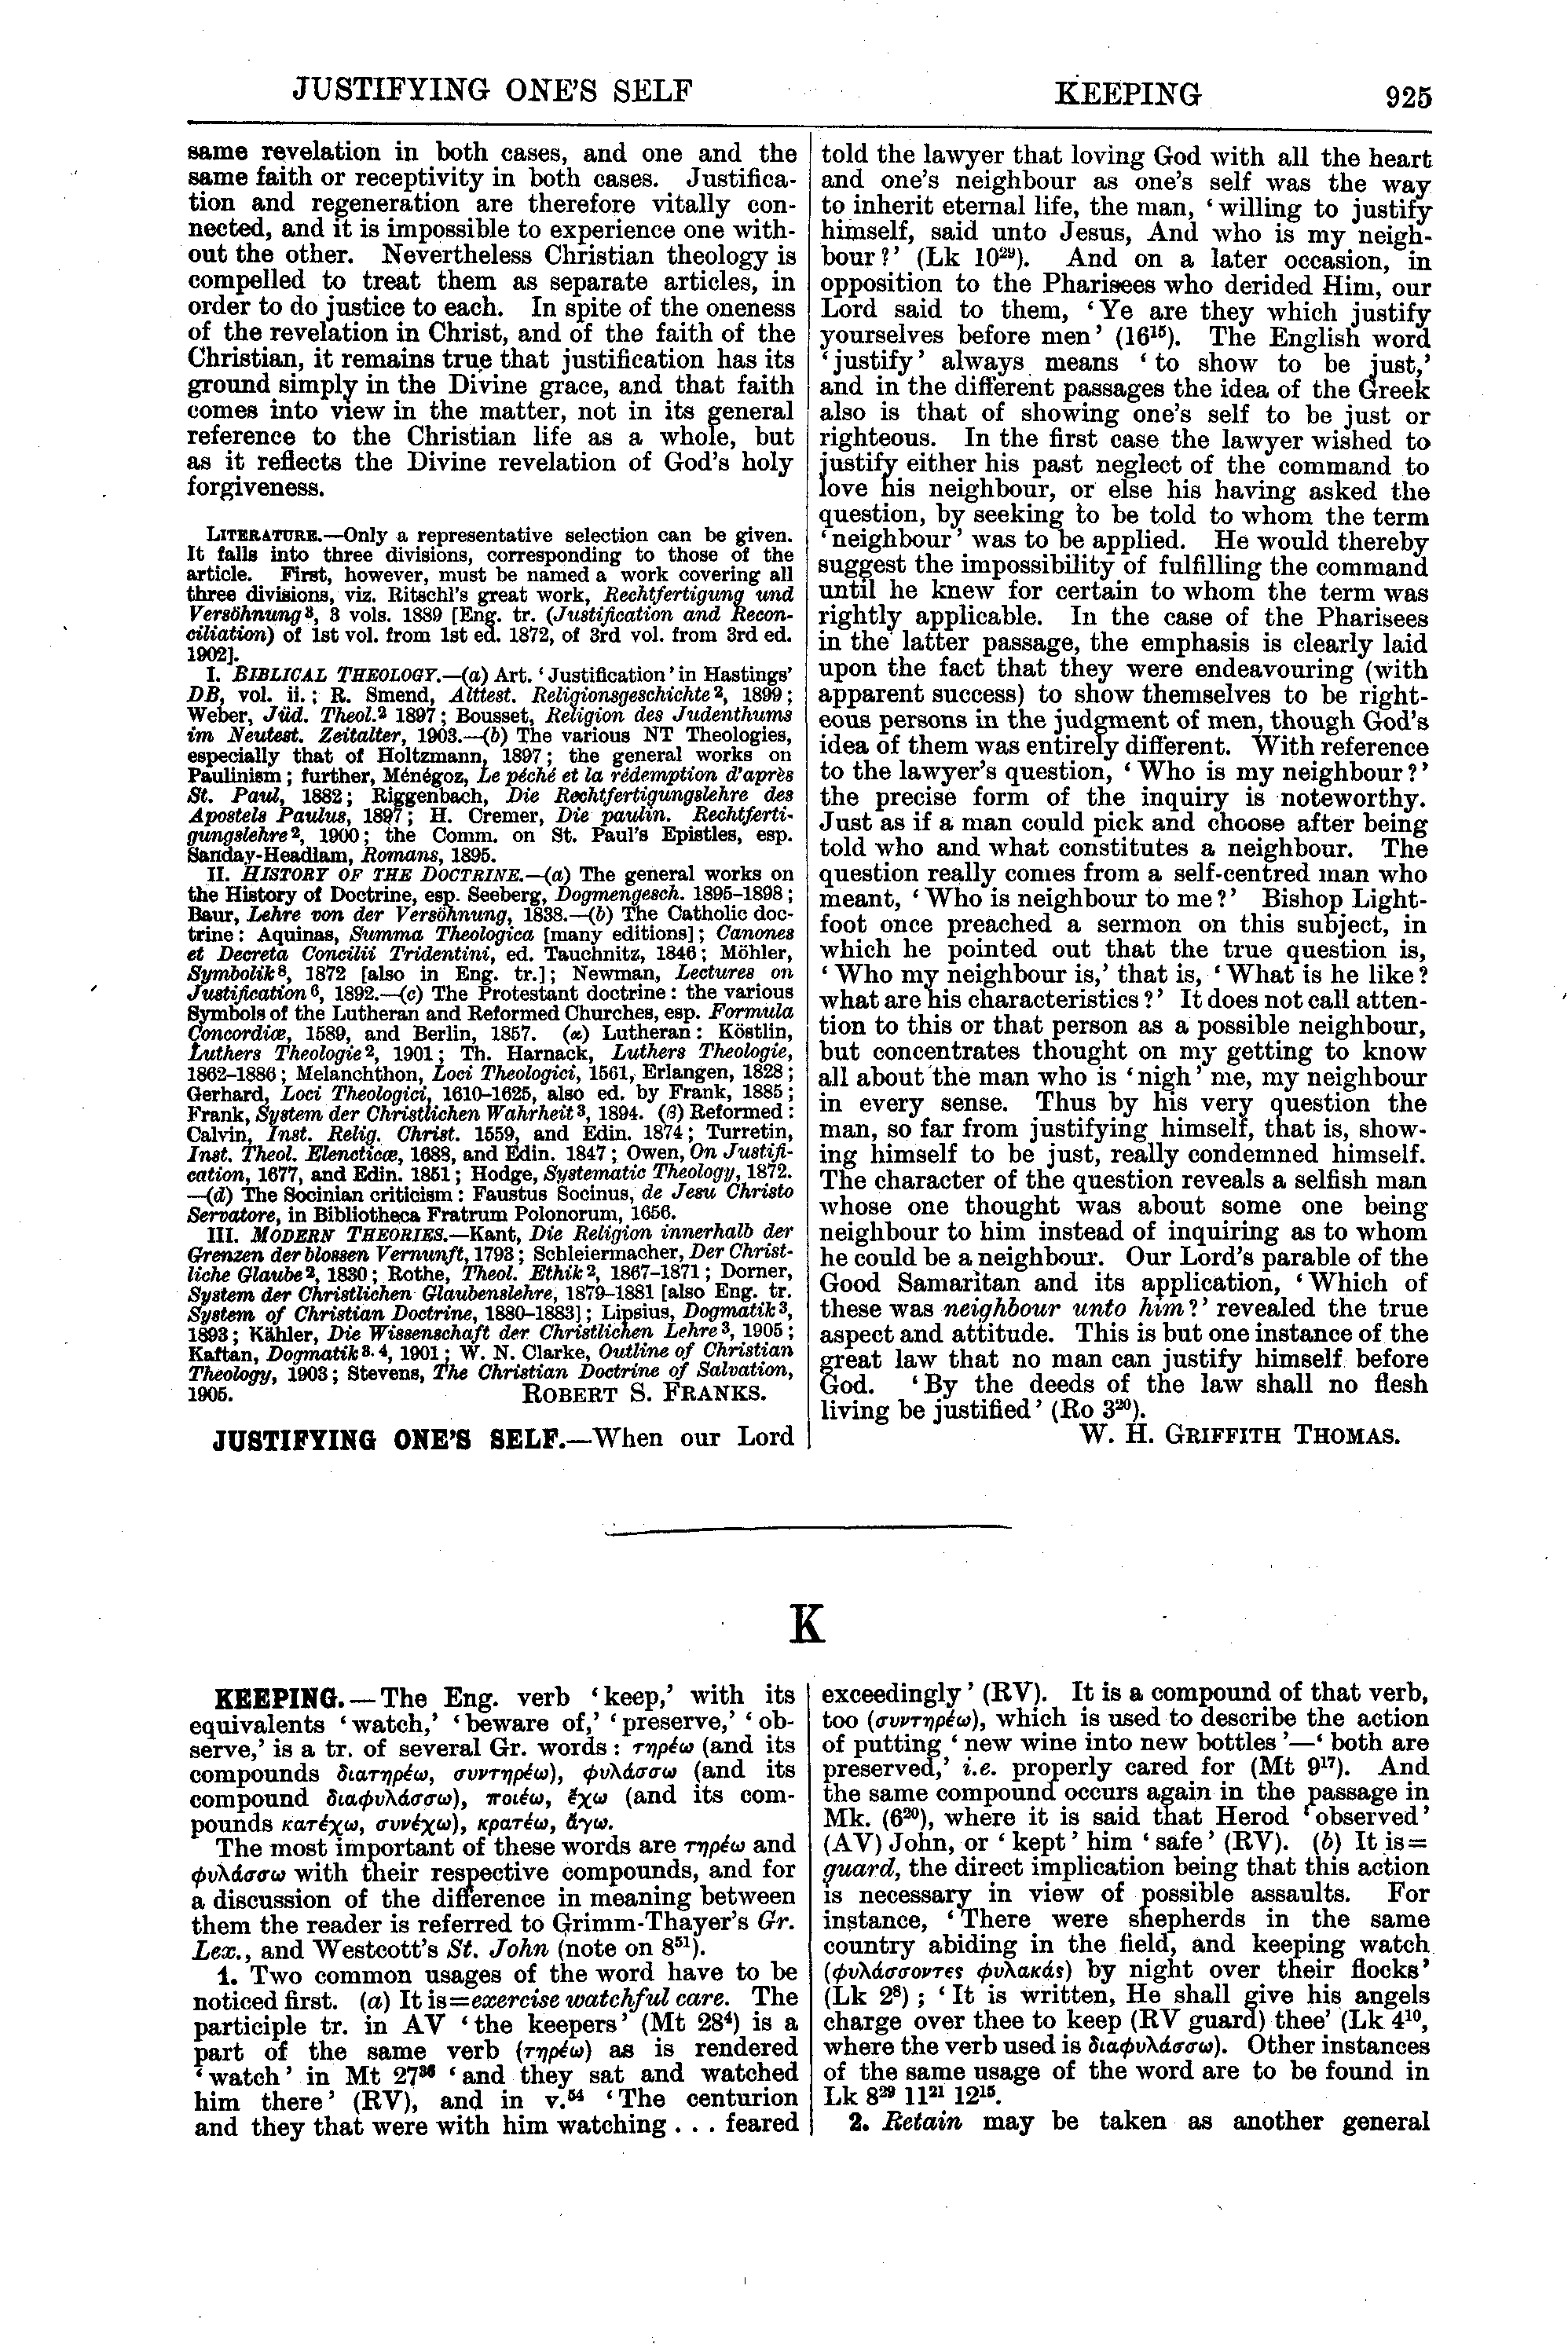 Image of page 925